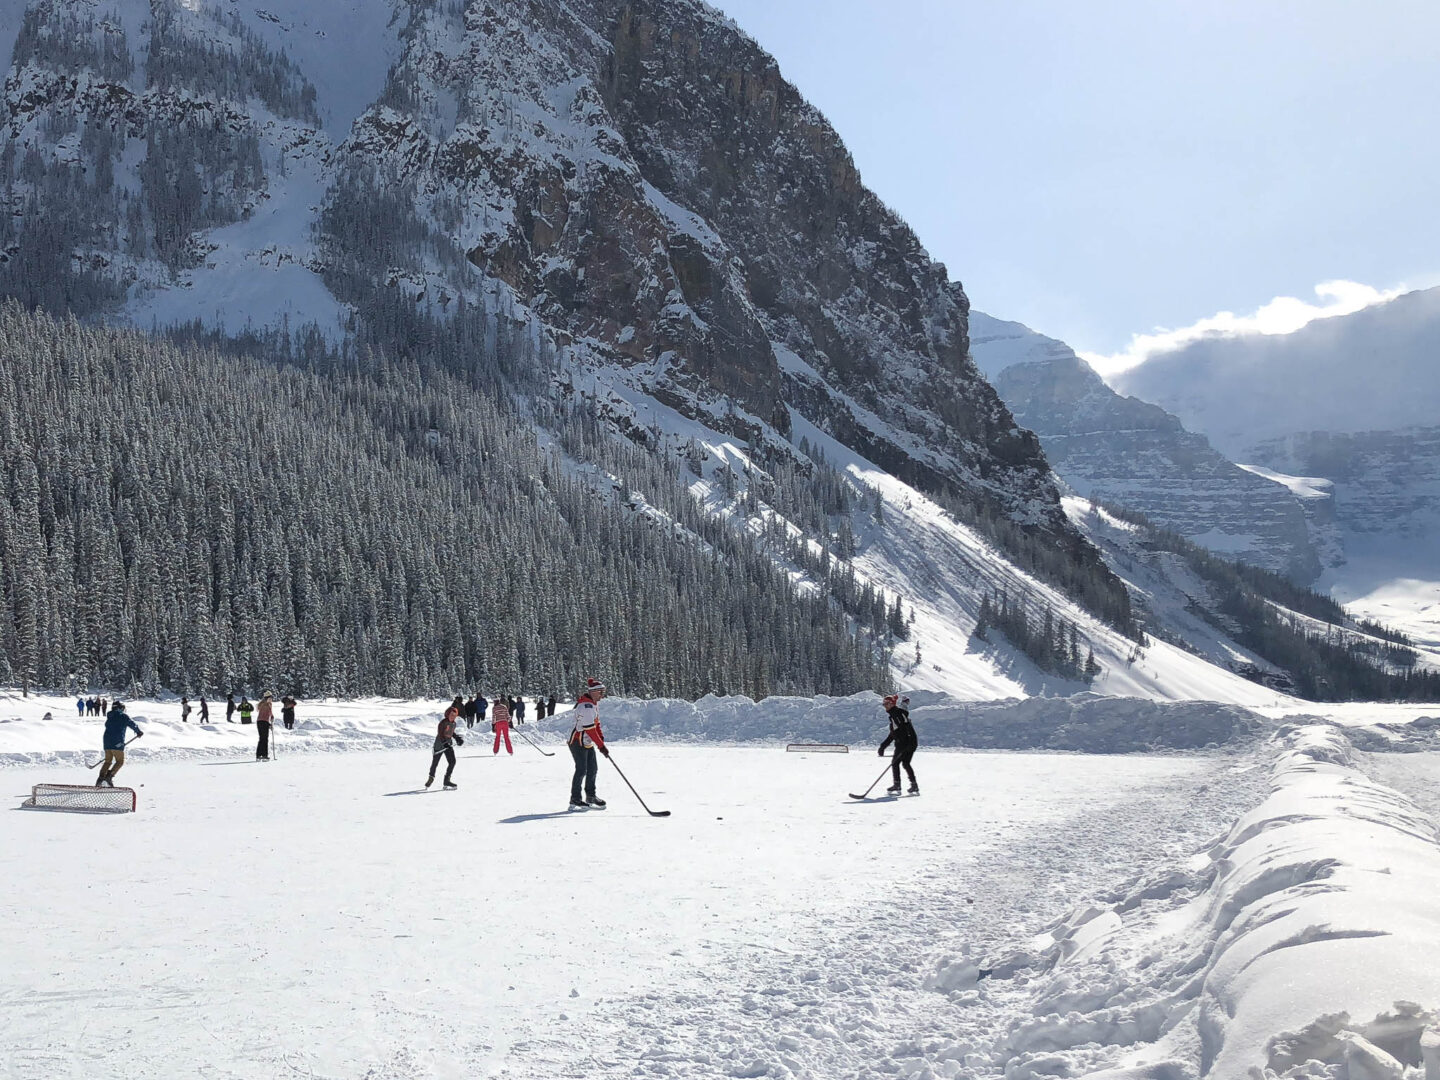 An unforgettable winter's day in Lake Louise, Canada